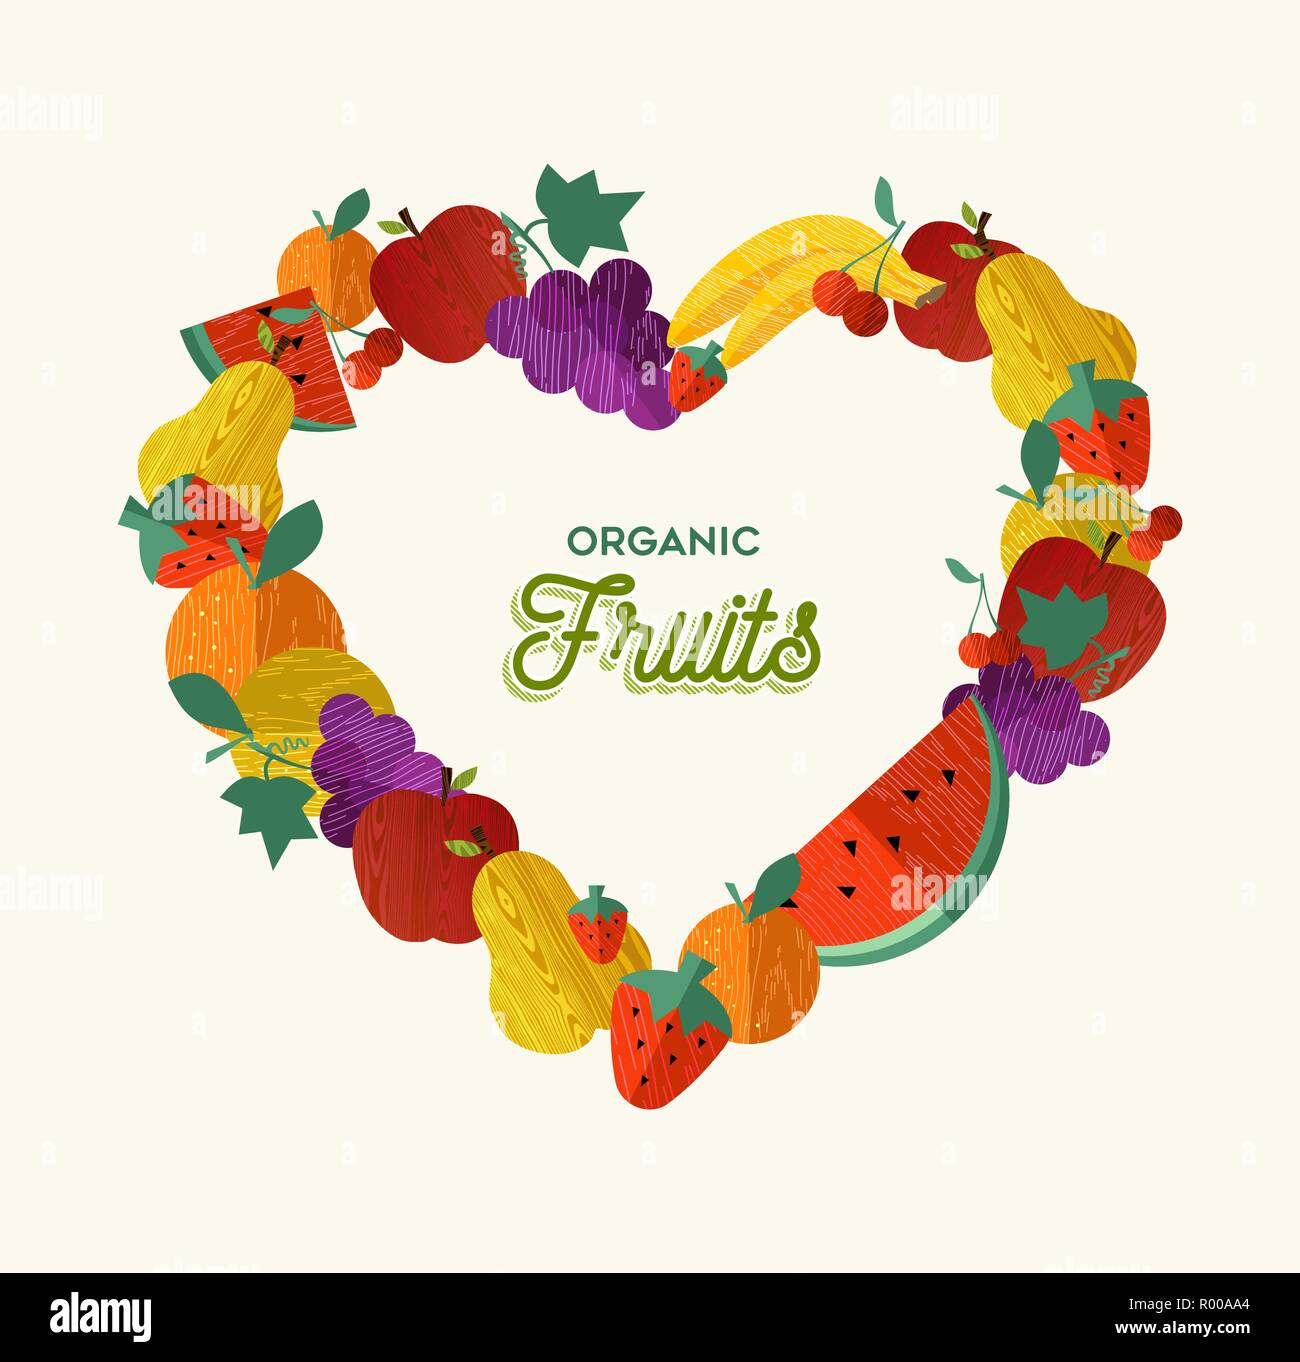 Organic fruit illustration love heart menu design for nutrition and healthy food diet background. Includes apple, banana, watermelon, orange. Stock Vector